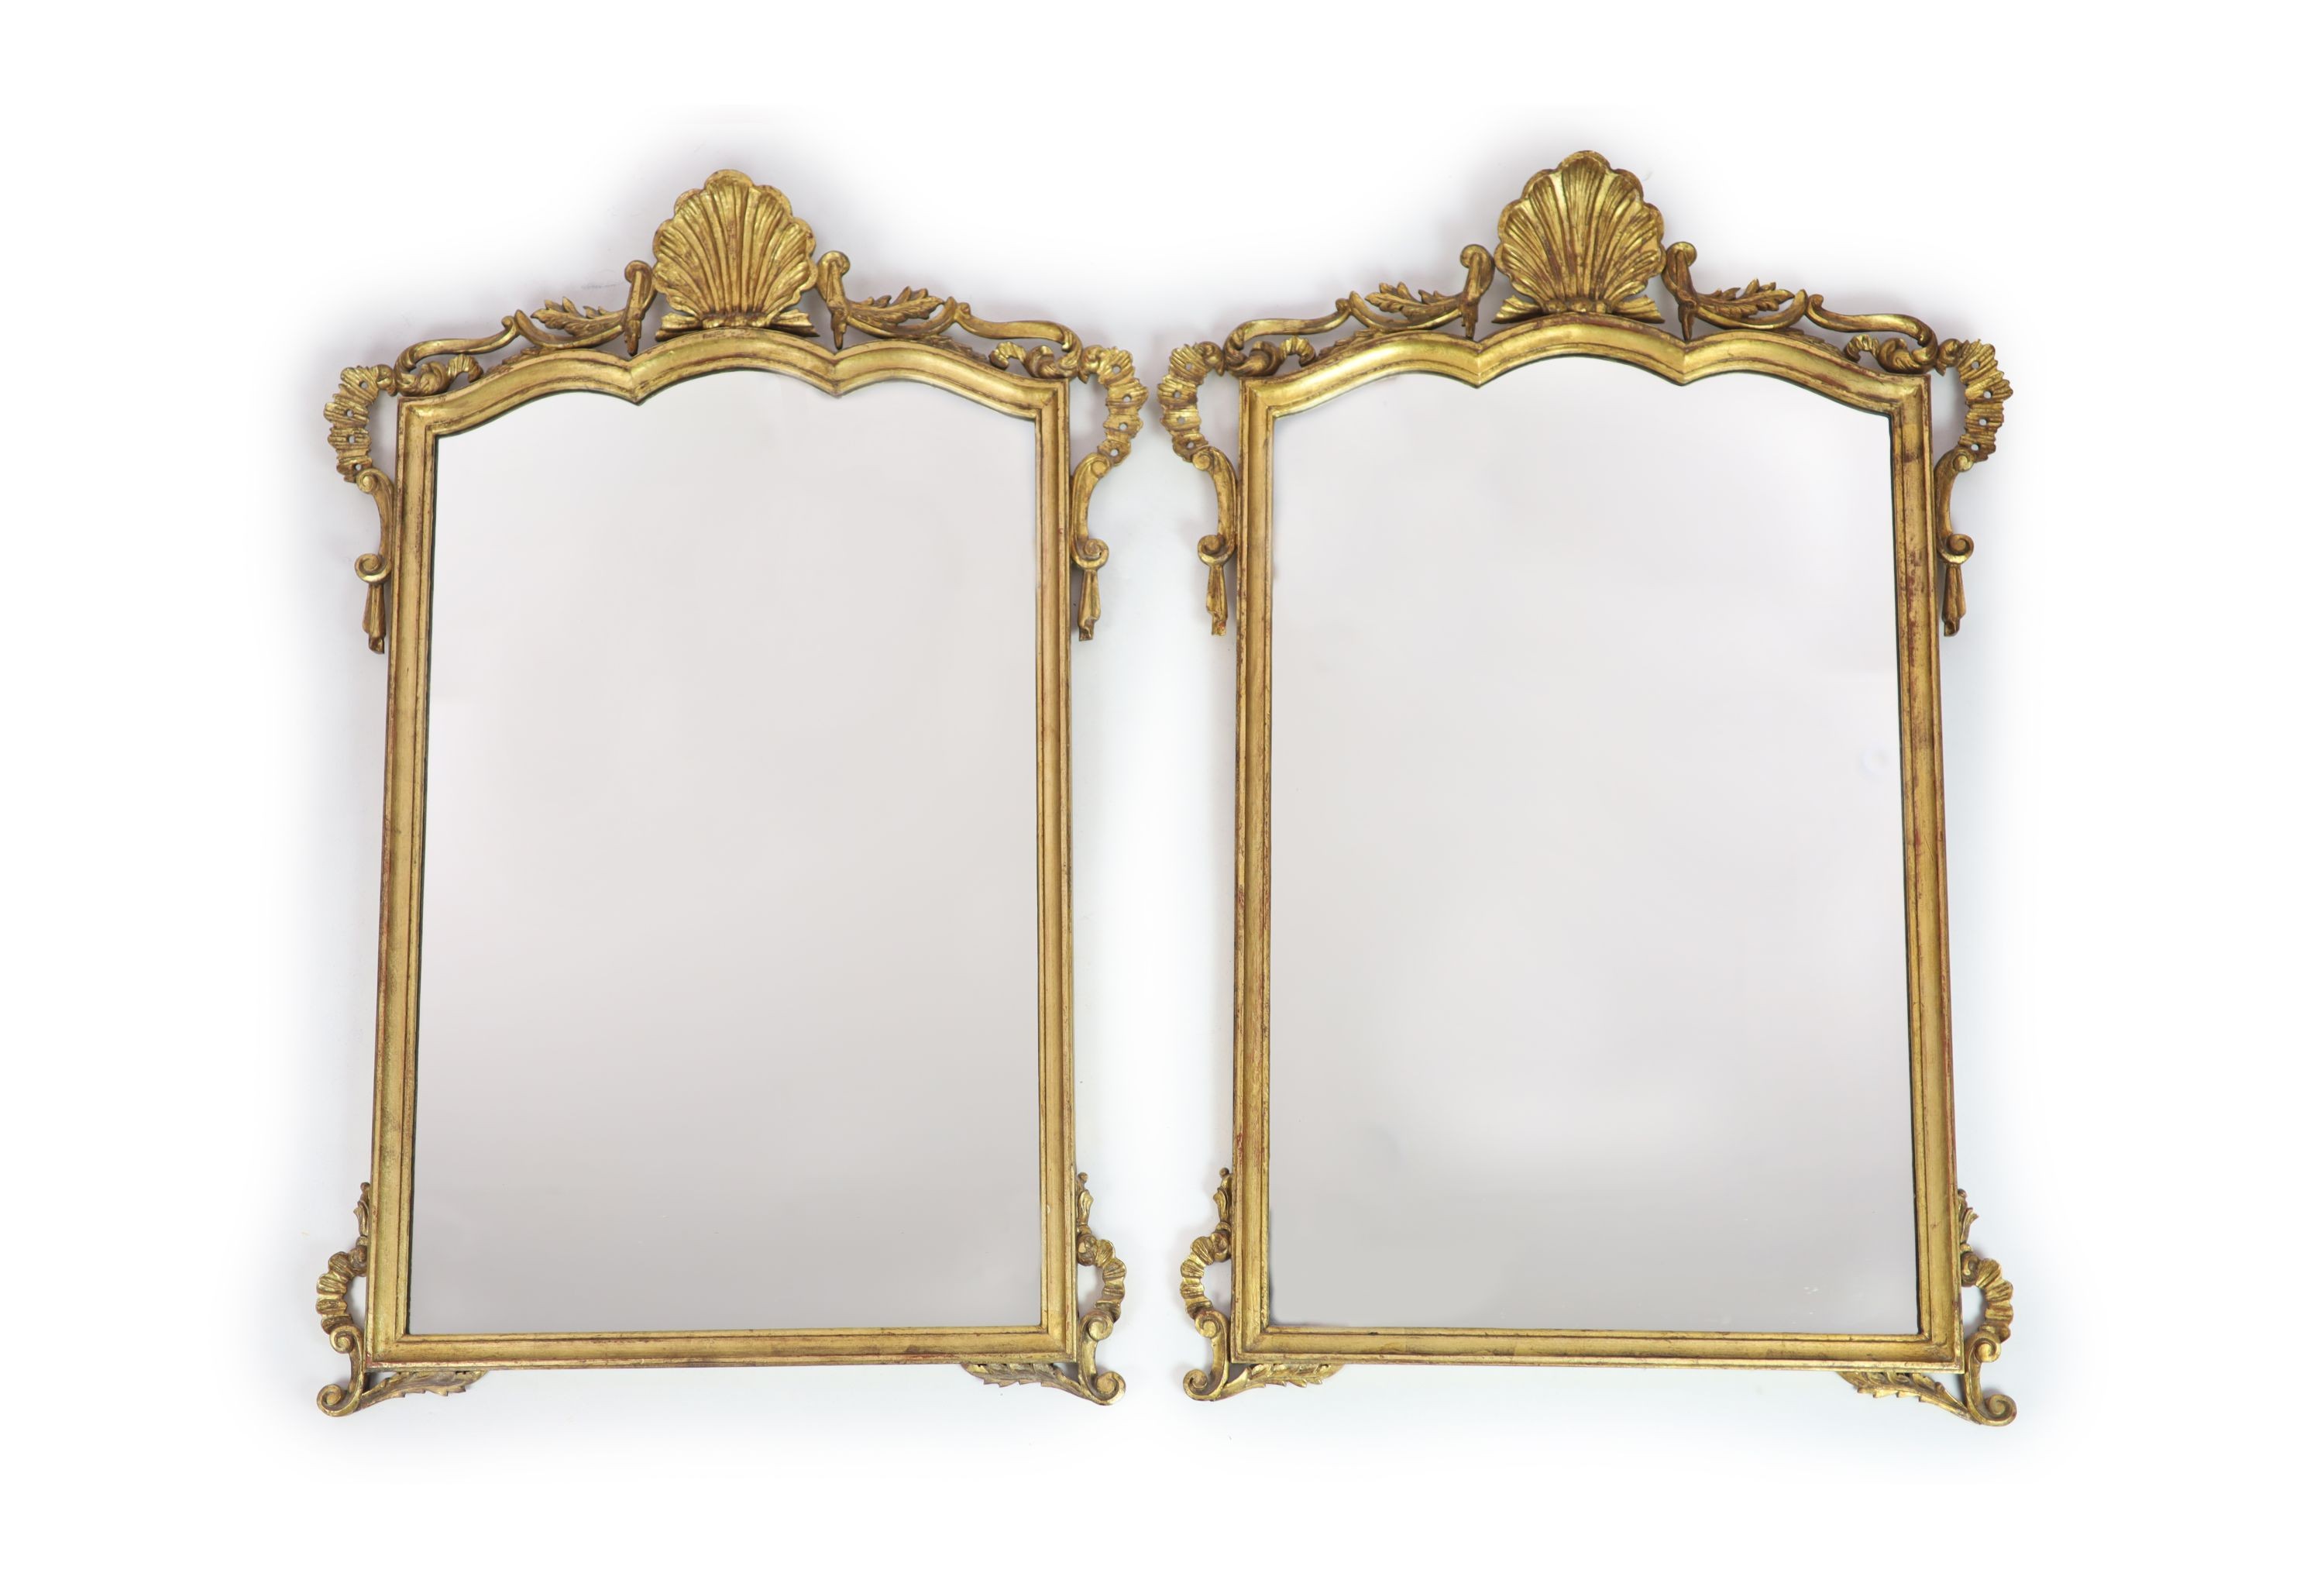 A pair of Georgian style carved giltwood wall mirrors